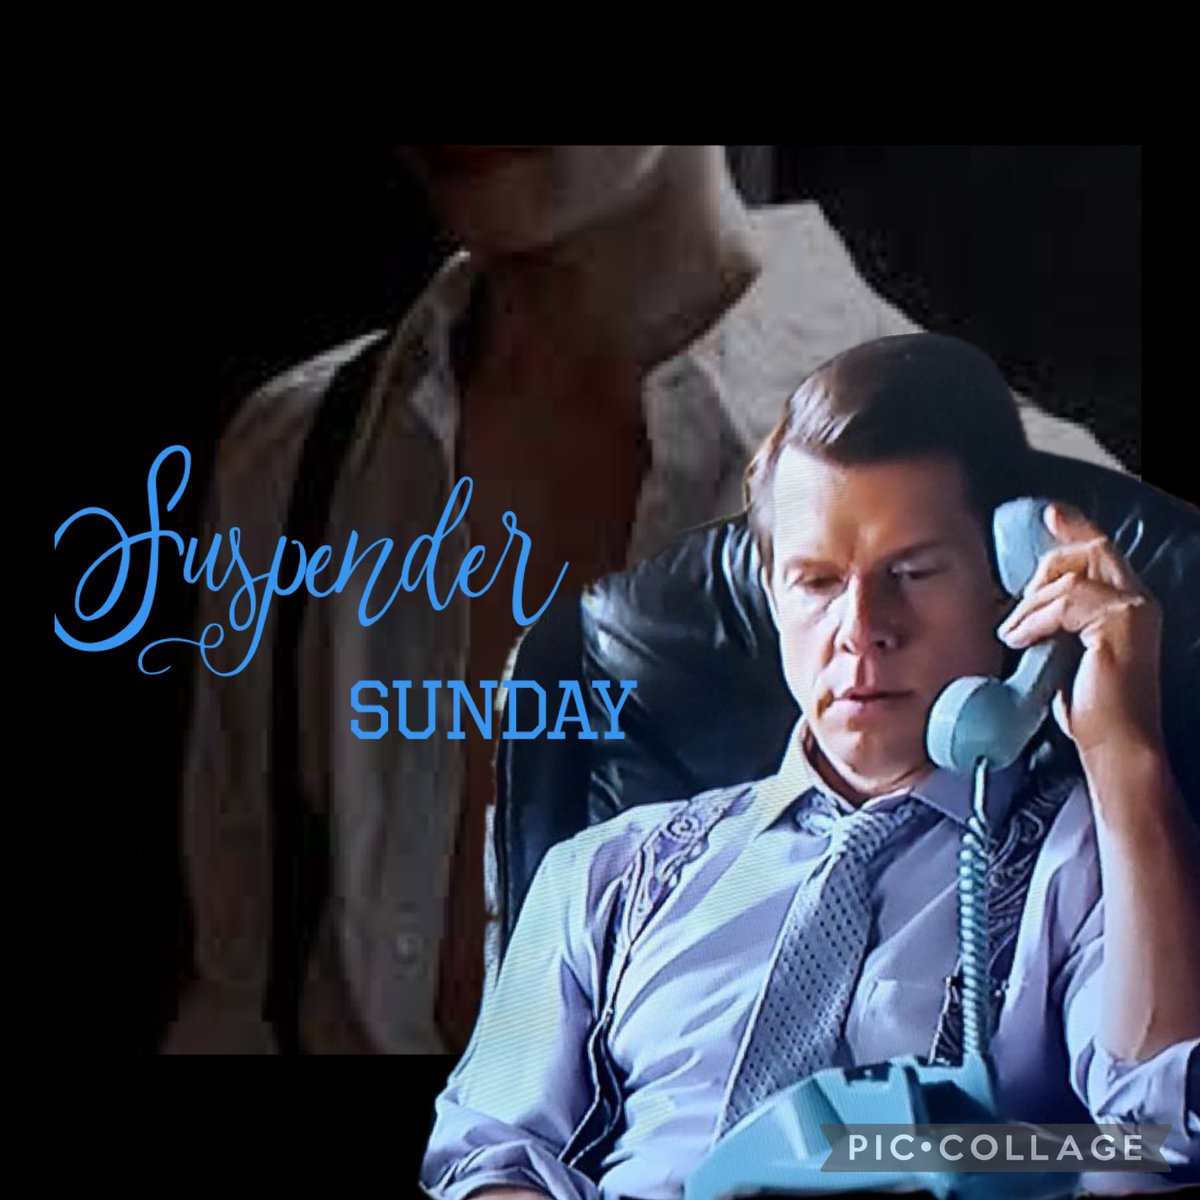 SuspenderSunday💫 Last week of shooting peeps! We know whatever @MarthaMoonWater @Eric_Mabius @kristintbooth @RealCrystalLowe & @geoffgustafson have created for us, it will be absolutely OUTSTANDING, becuz they NEVER phone it in…😉 Have a great day #POstables!! #SSD12 #SSD13